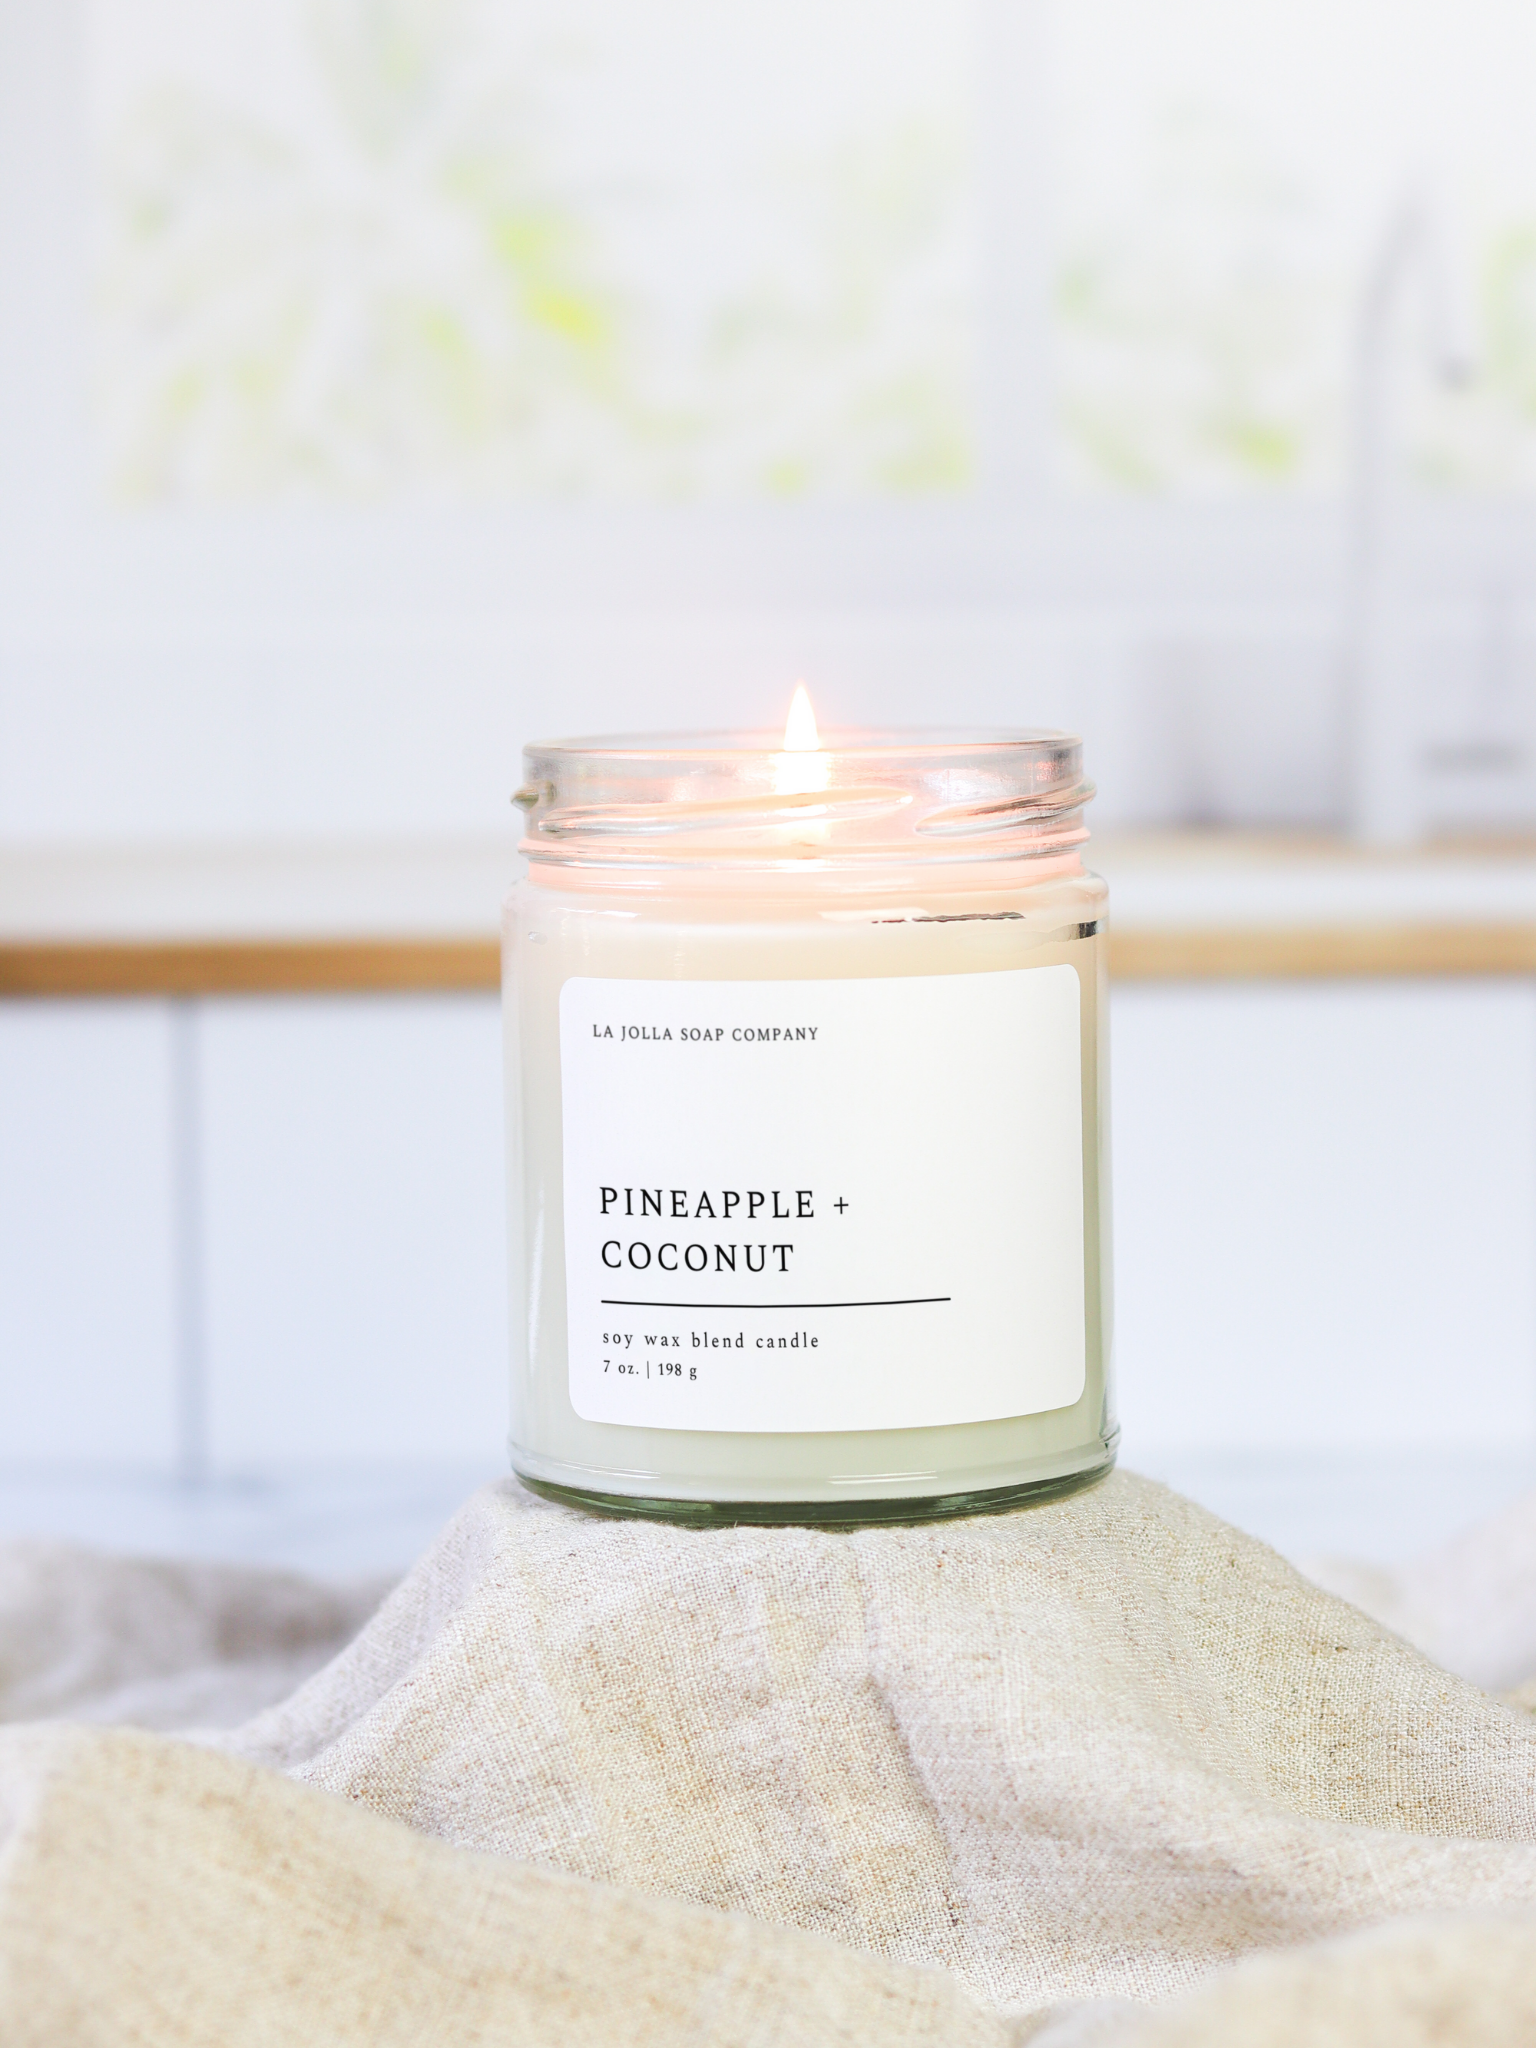 Pineapple Coconut 7 oz candle in a clear jar with a black metal lid. Pineapple and coconut, blended together in perfect harmony. The aroma conjures images of swaying palm trees and sun-drenched shores, offering a serene Tropical Paradise in your own home